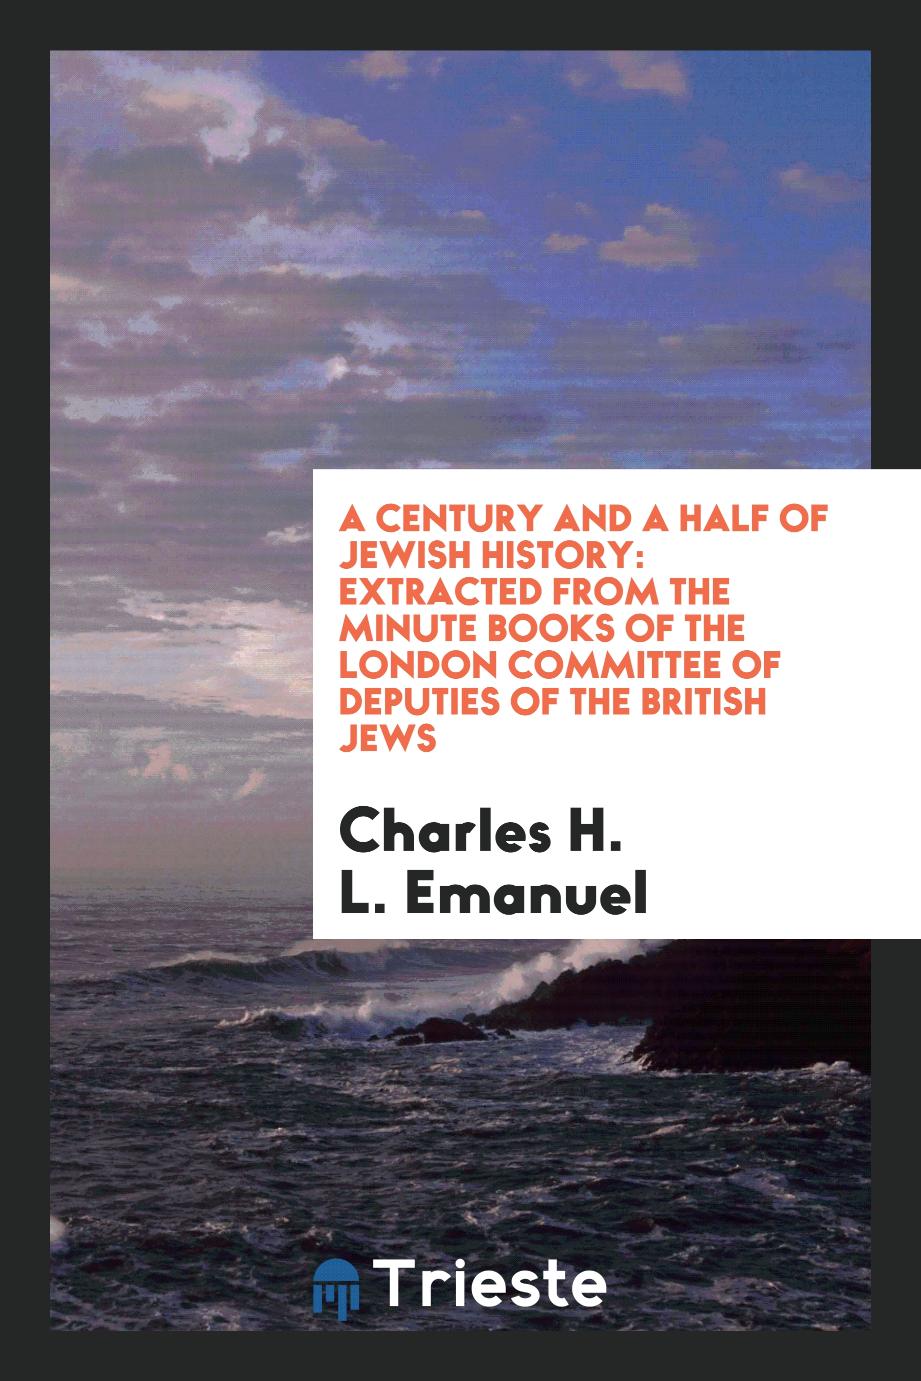 A Century and a Half of Jewish History: Extracted from the Minute Books of the London Committee of Deputies of the British Jews